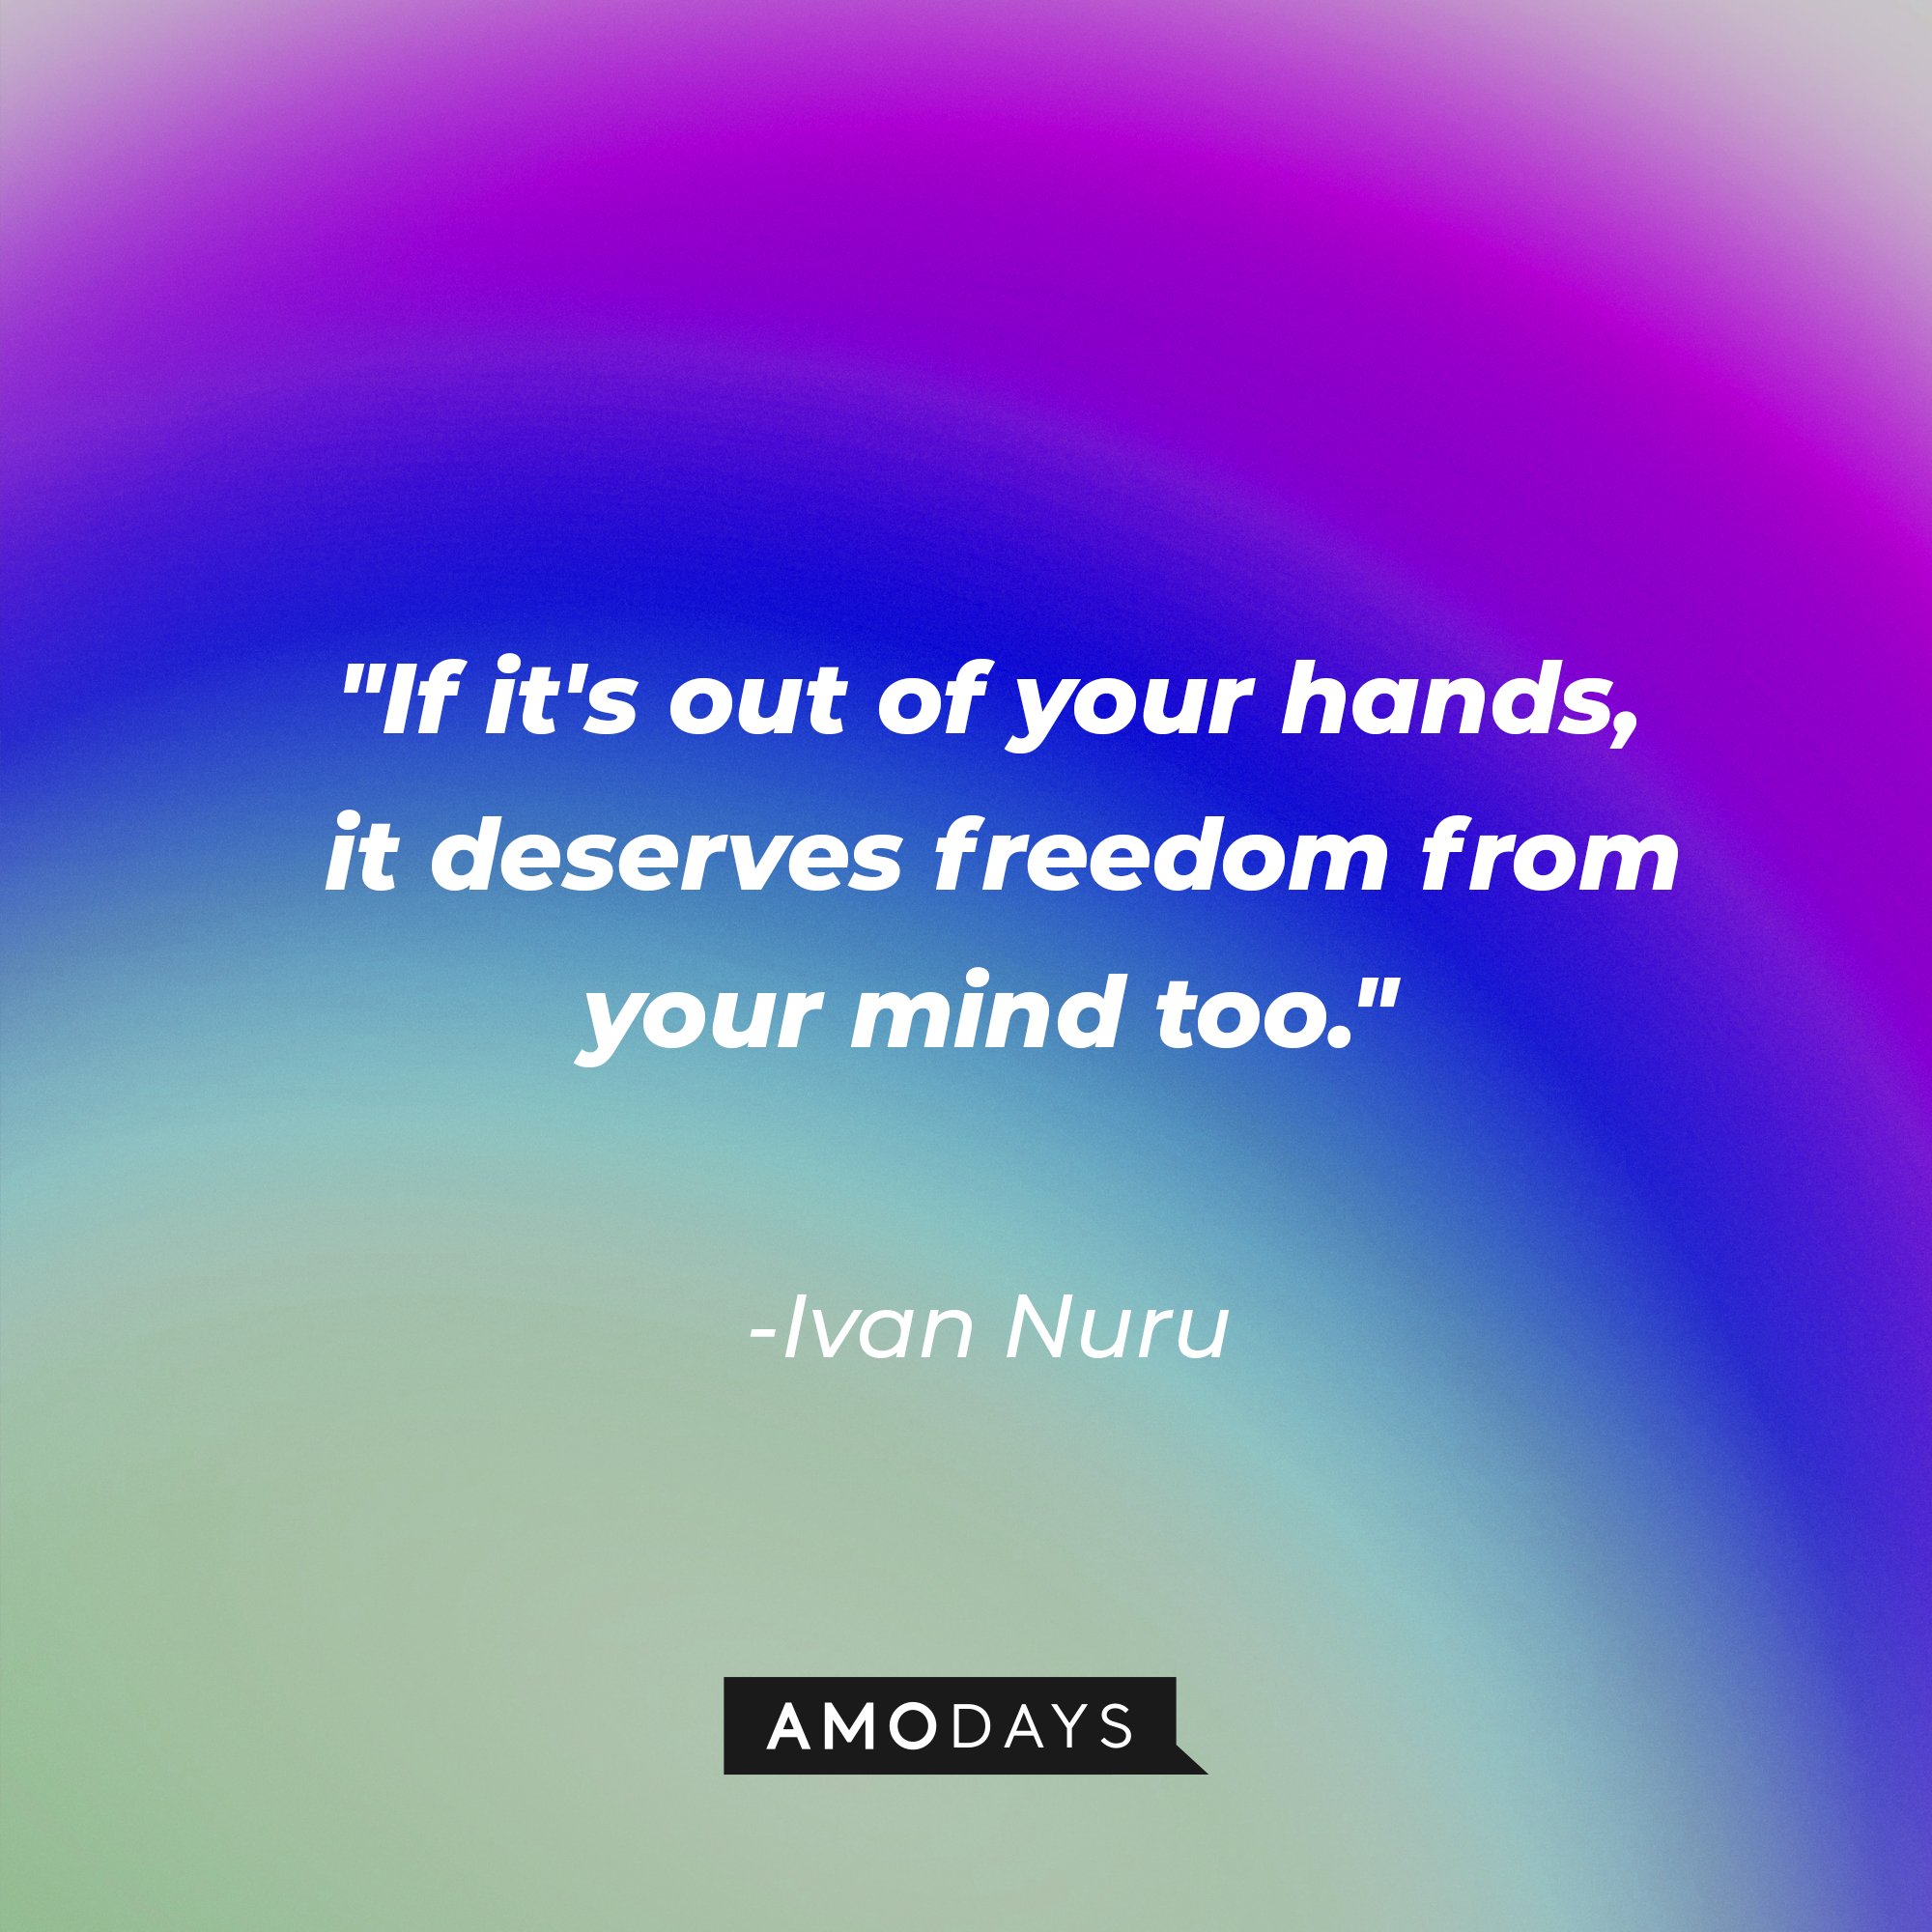 Ivan Nuru's quote: "If it's out of your hands, it deserves freedom from your mind too." | Image: AmoDays